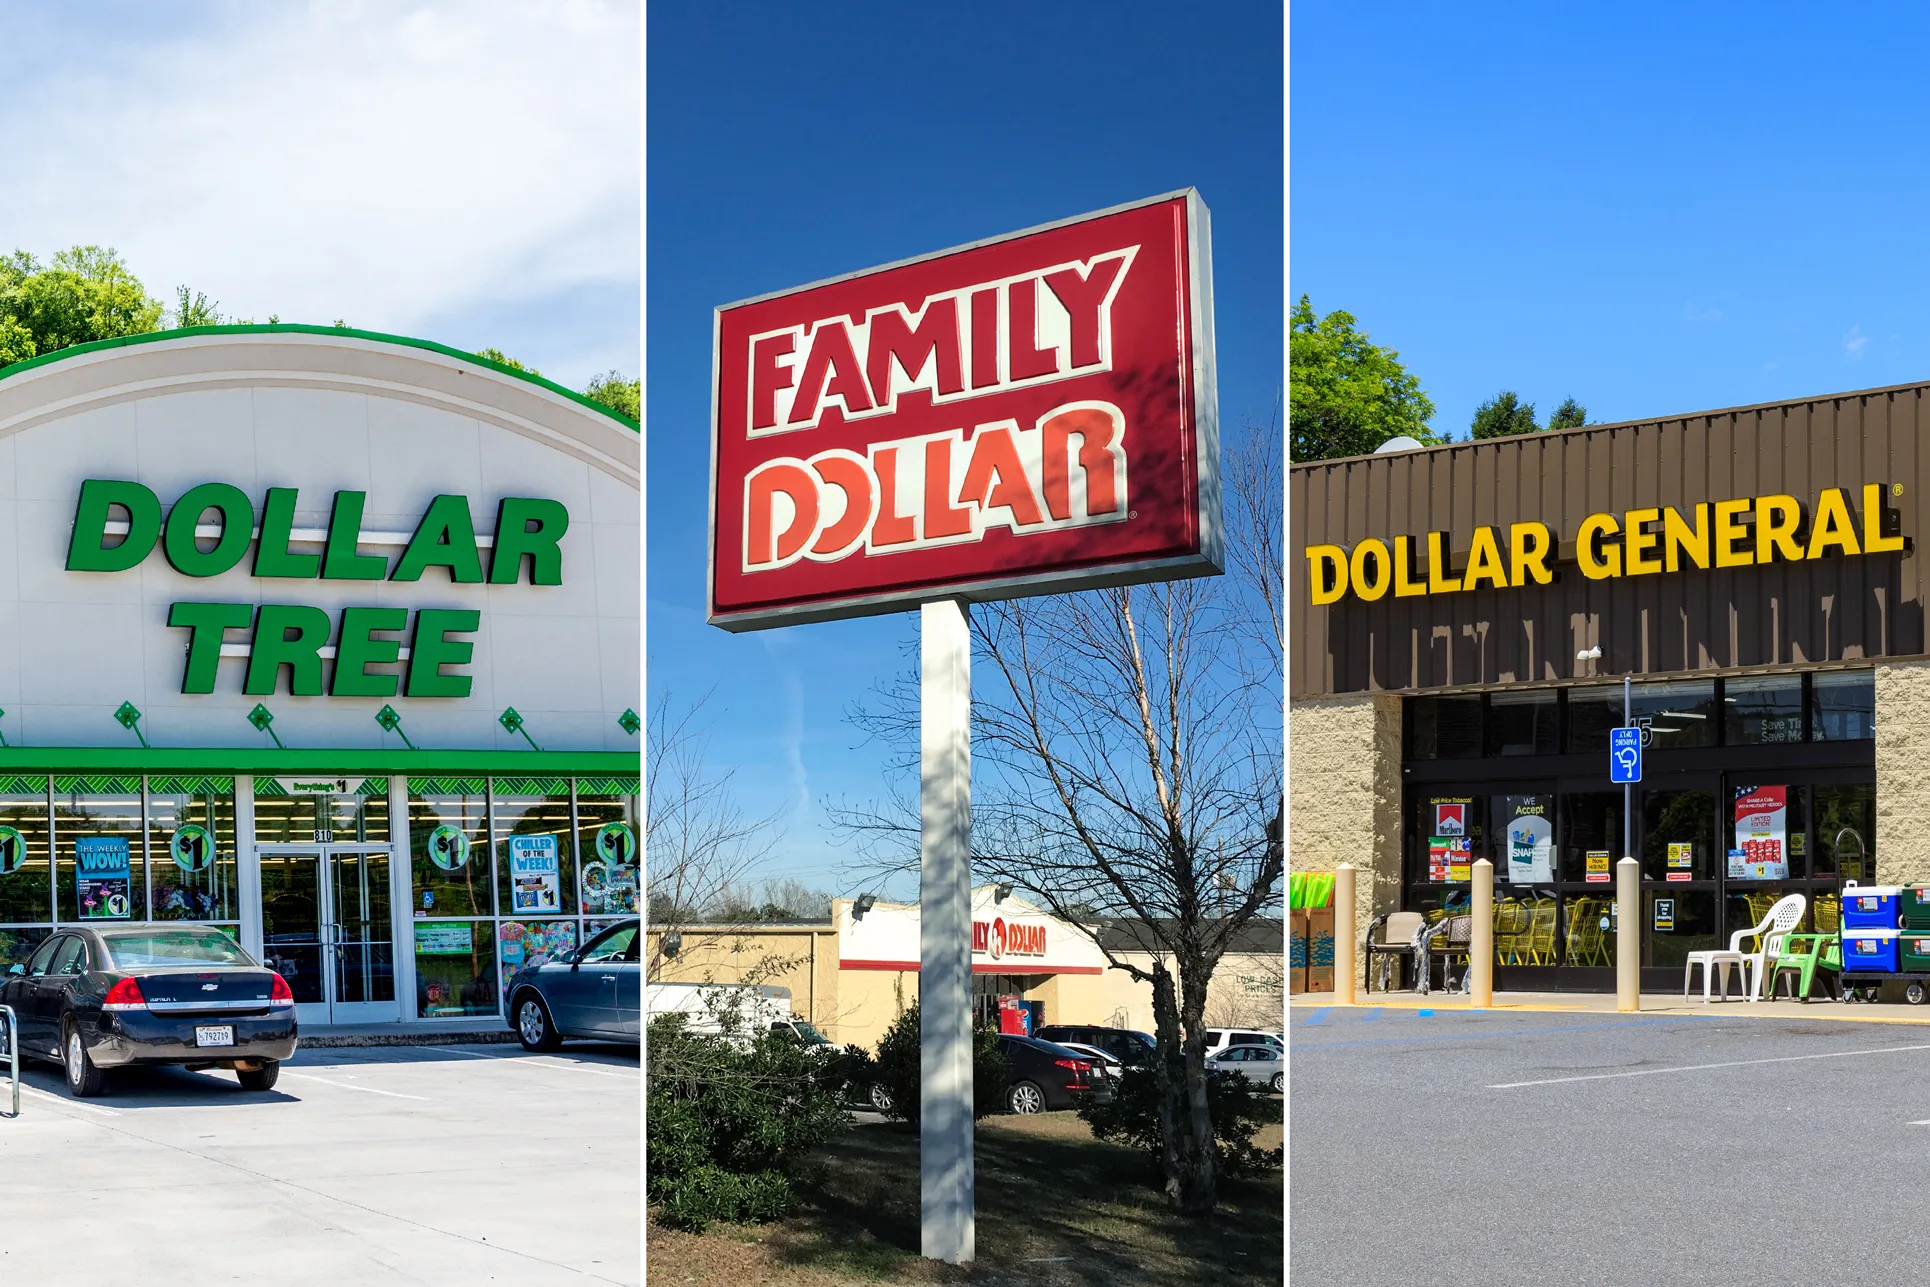 Dollar Tree to Stop Selling Things for $1